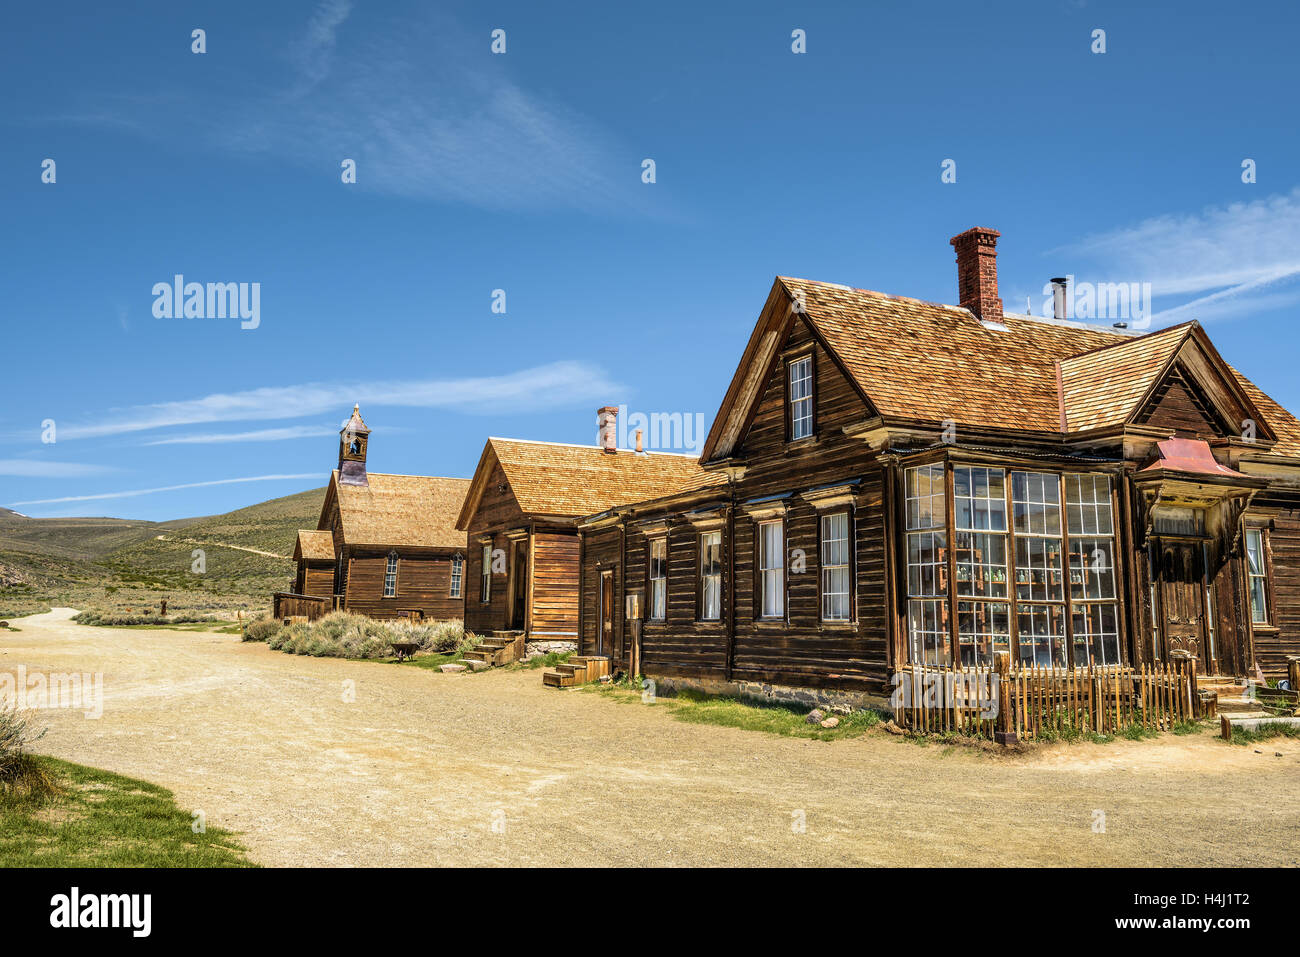 Bodie ghost town in California. Bodie is a historic state park from a gold rush era  in the Bodie Hills east of the Sierra Nevad Stock Photo